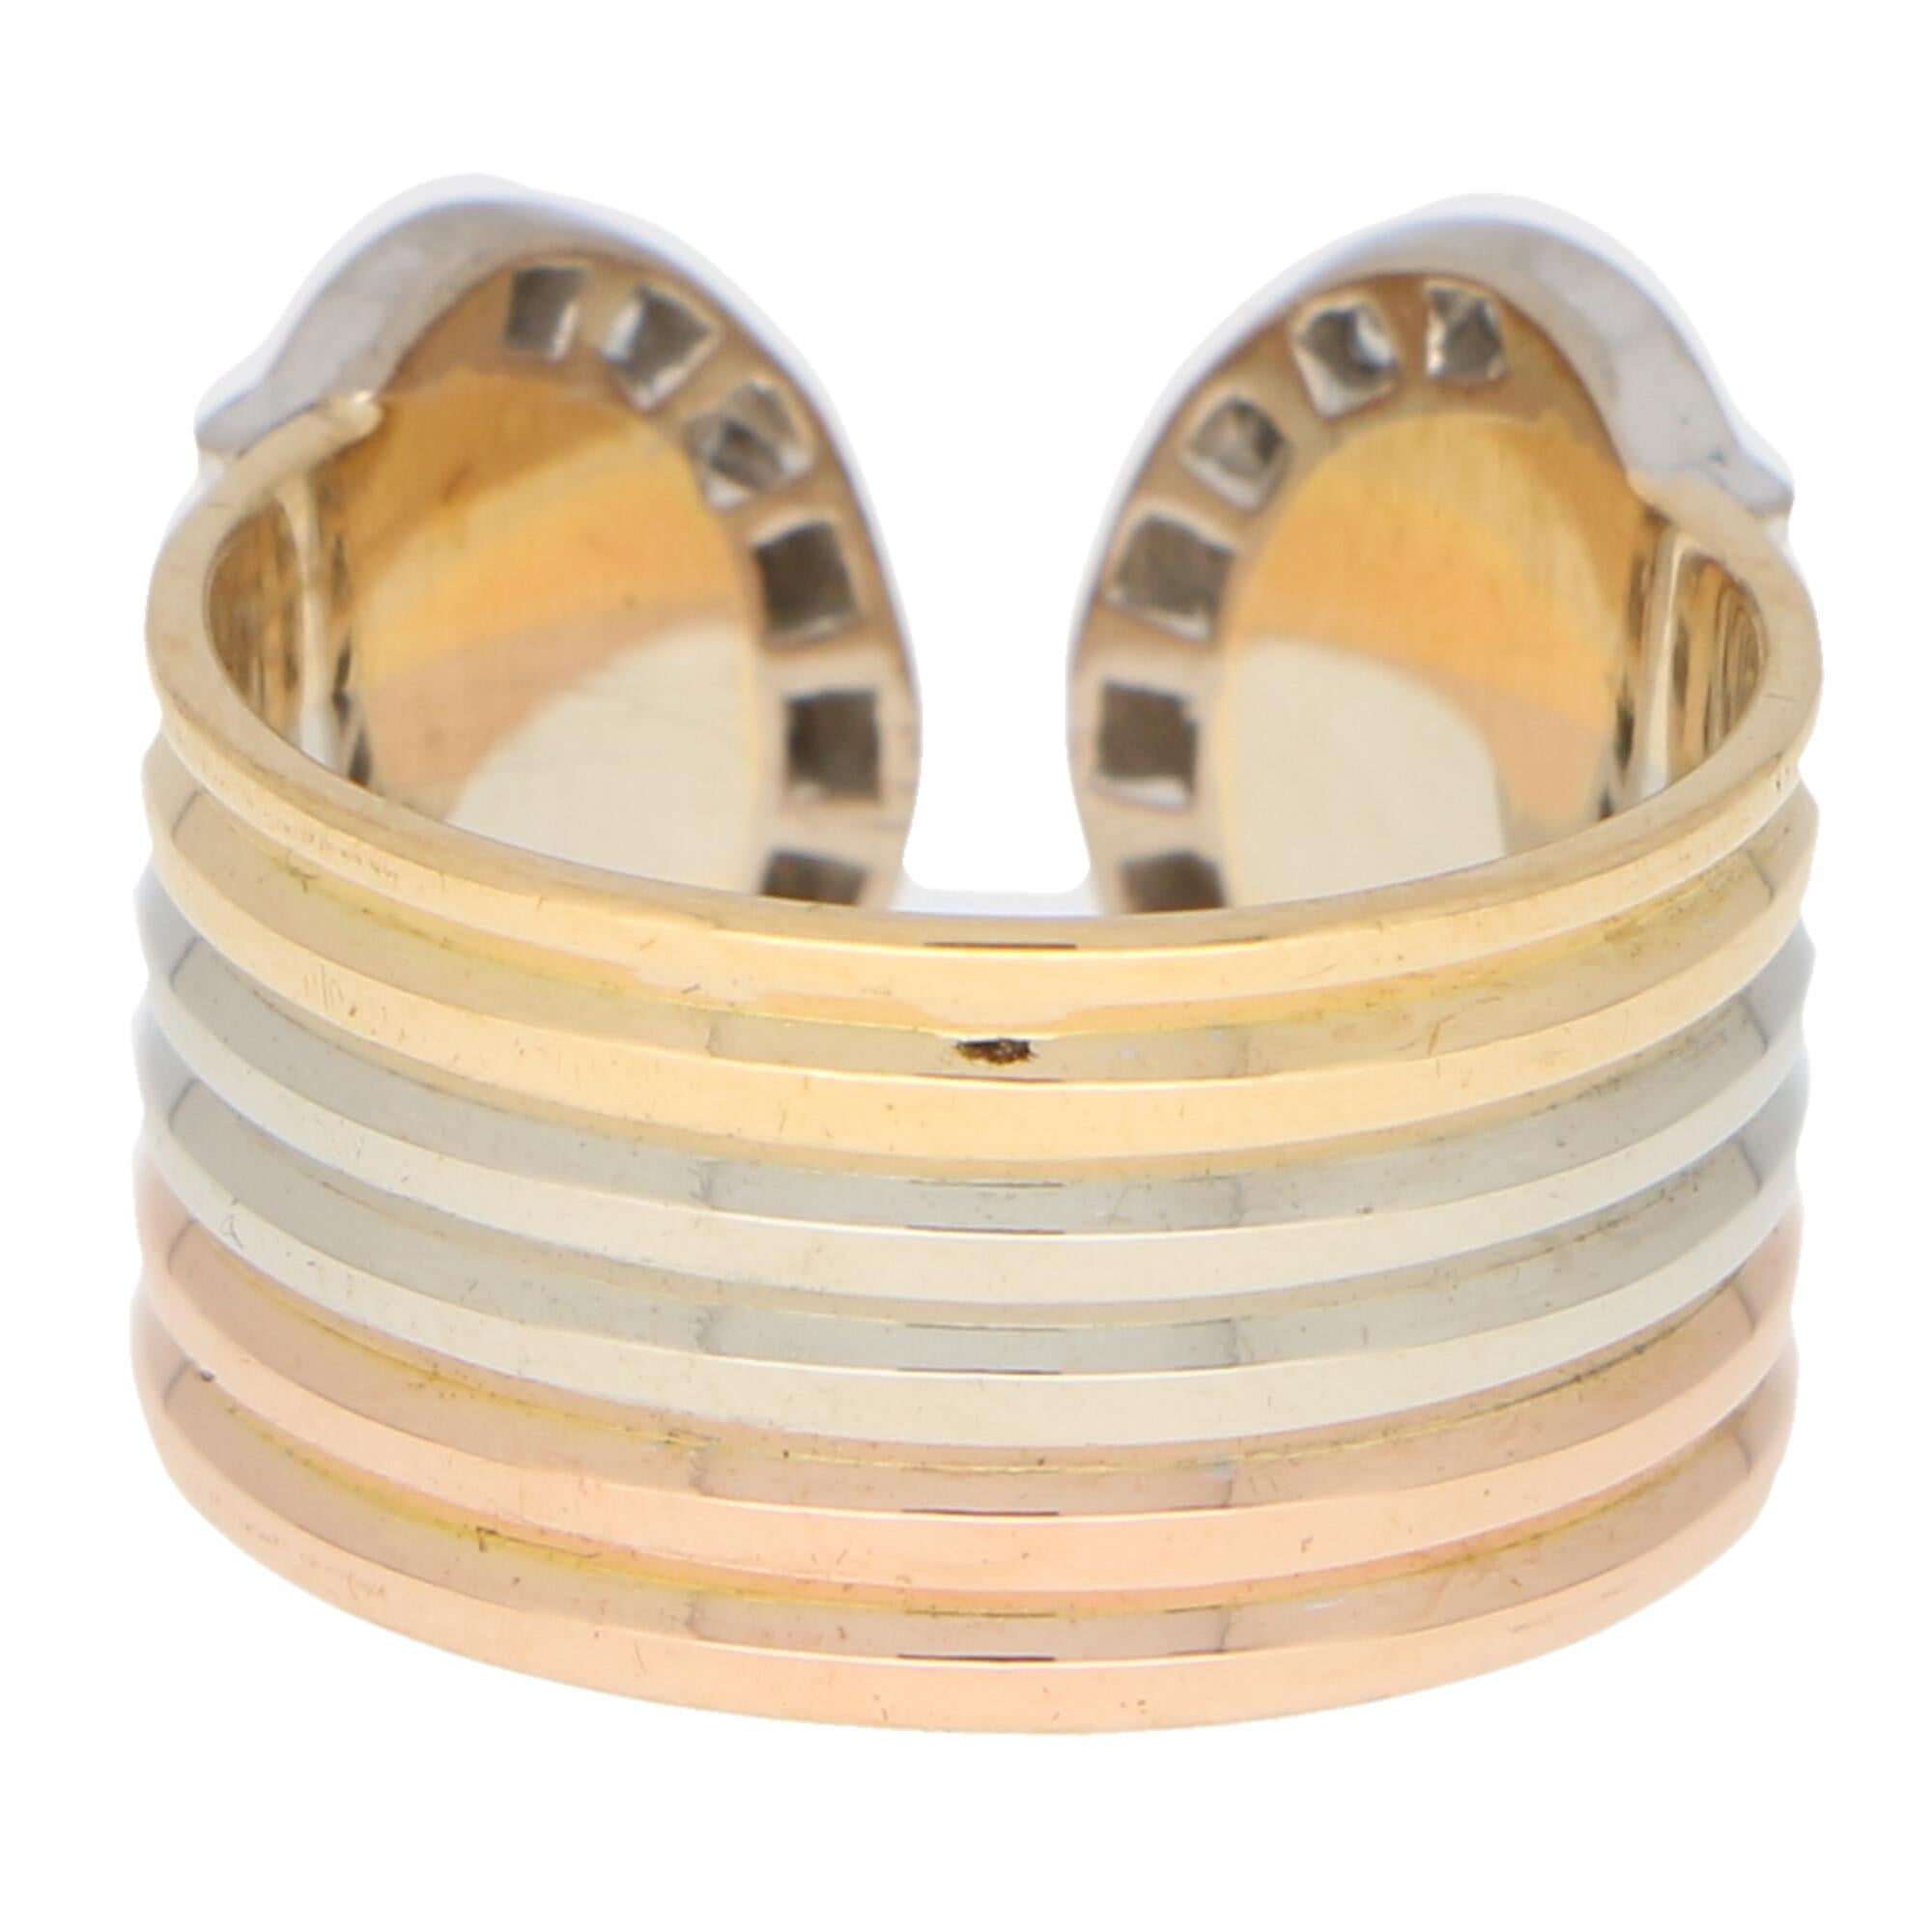 Round Cut C de Cartier Diamond Trinity Band Ring Set in 18k Yellow, White and Rose Gold